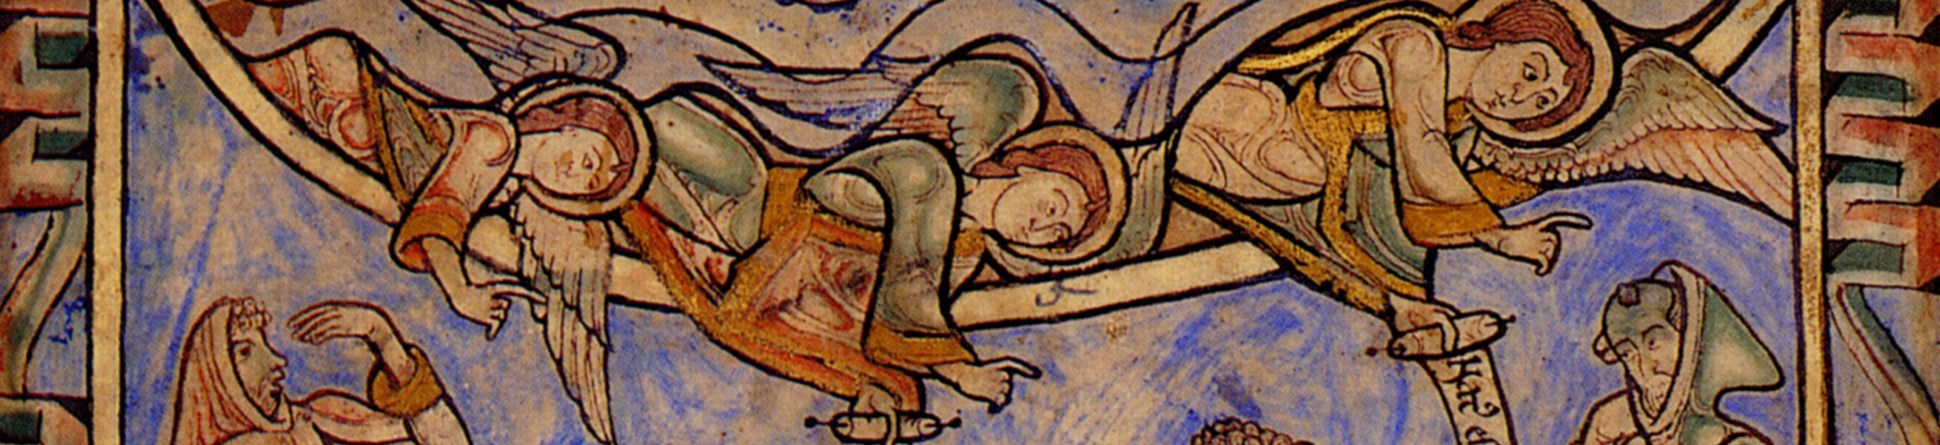 The Annunciation to the Shepherds and the Magi before Herod from the Winchester Psalter of Henry de Blois